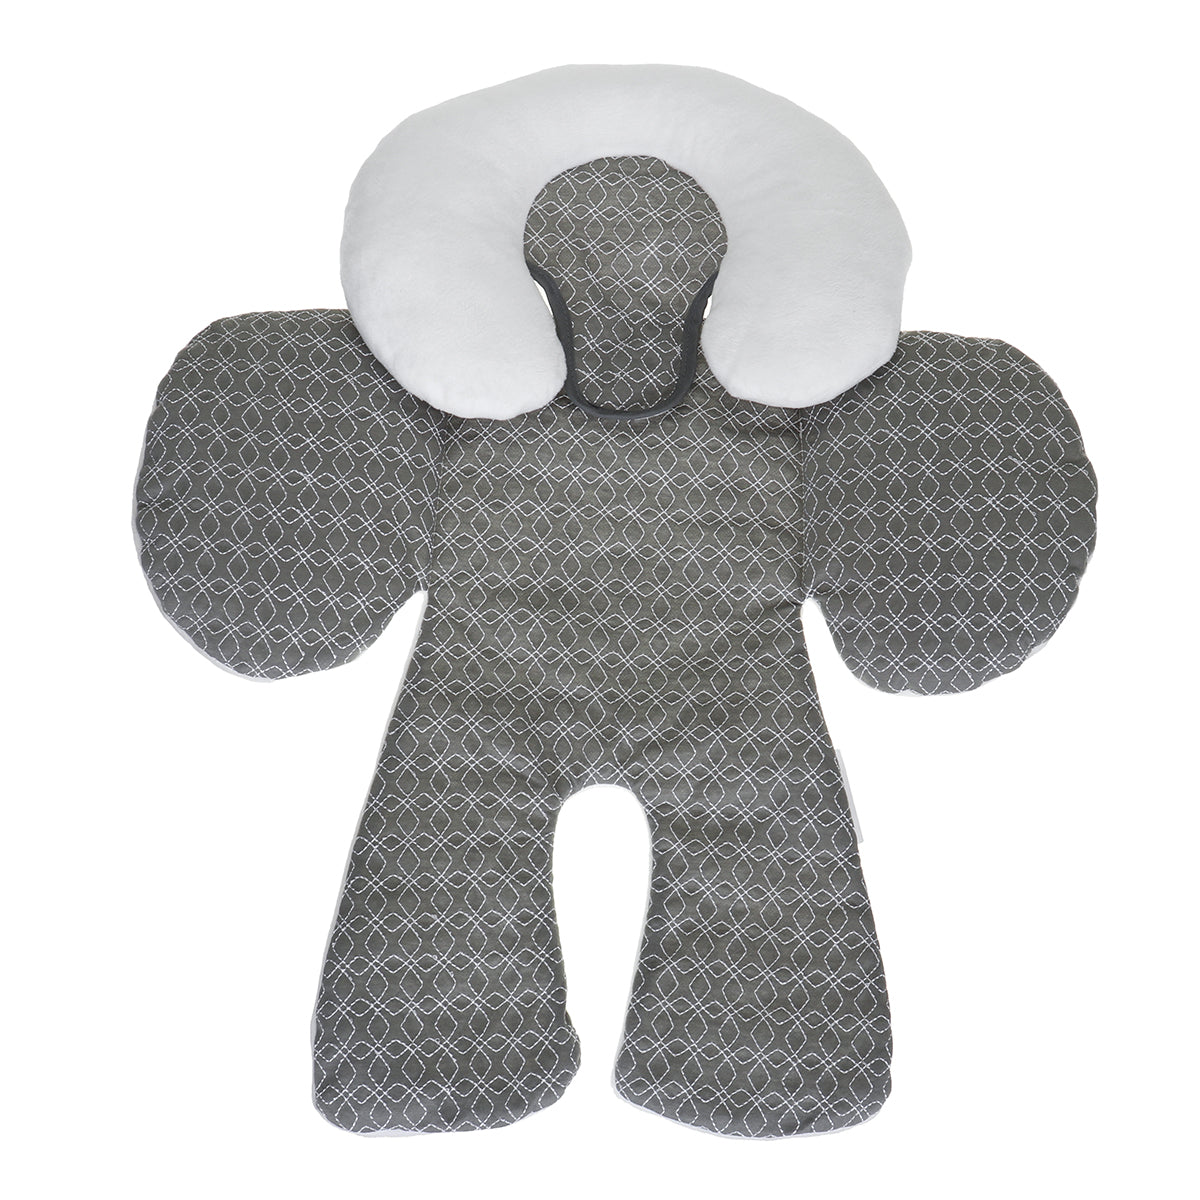 Dim Gray Baby Car Seat Cotton Mat Safety Body Soft Cushion Pad Pillow Child Seat Chair Protection